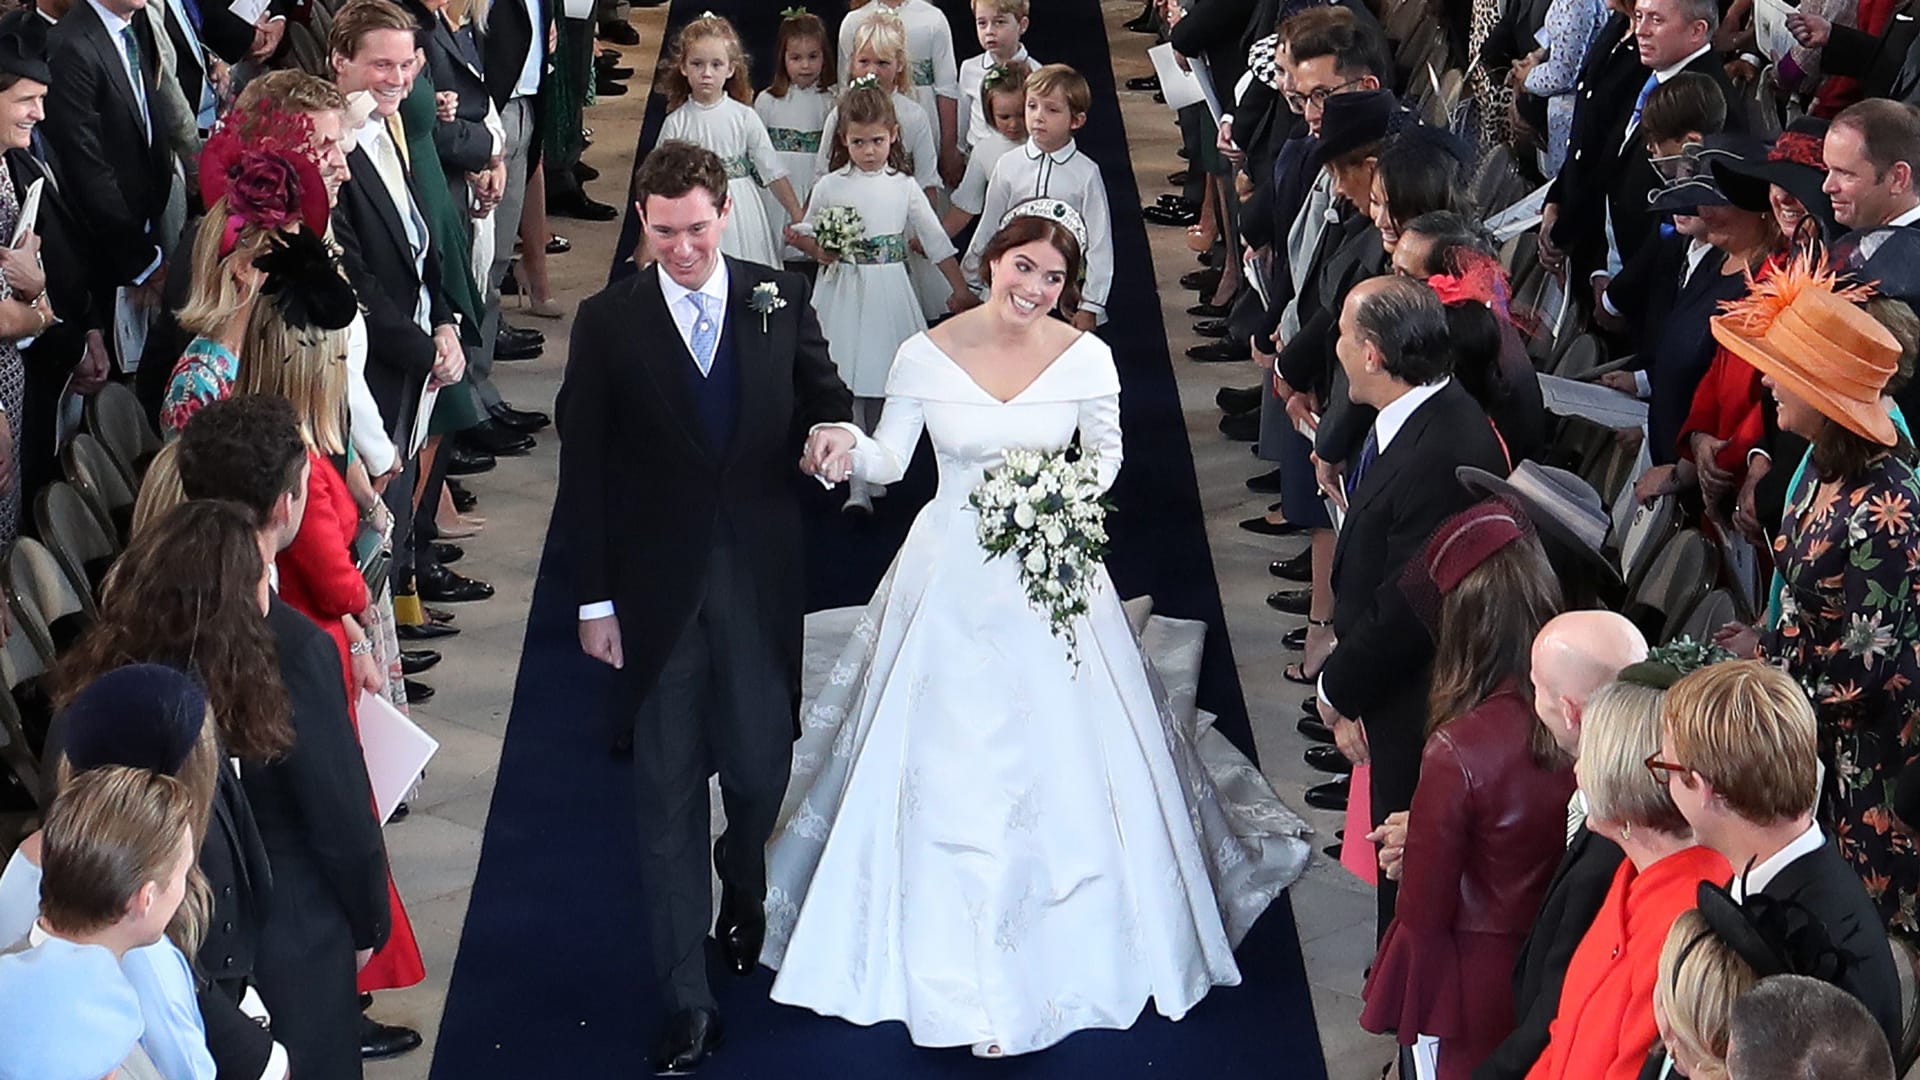 Yet another royal wedding: 5 memorable moments from Princess Eugenie’s big day